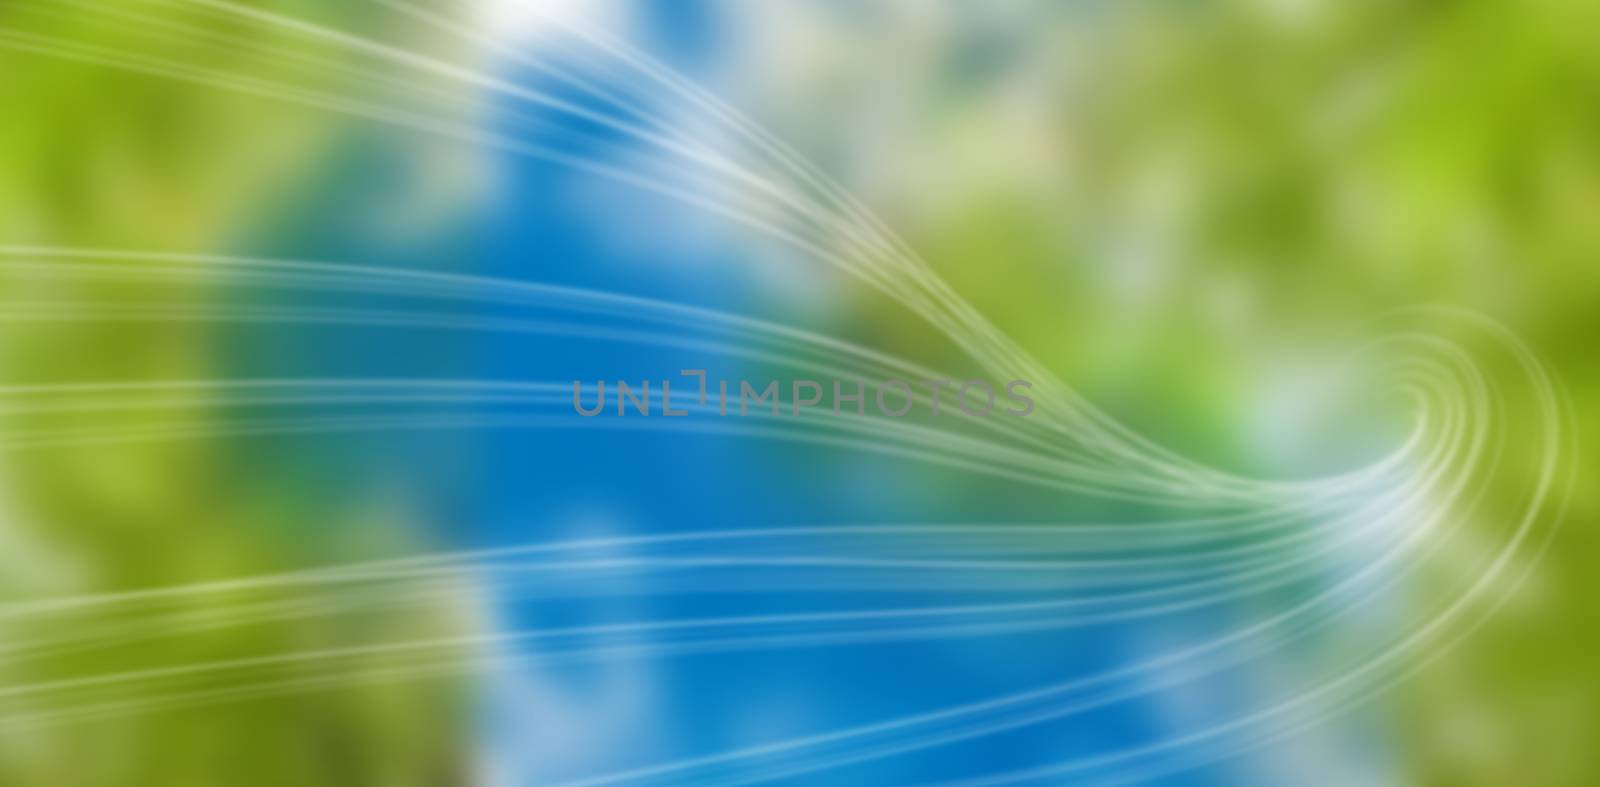 Composite image of blue background with shiny lines by Wavebreakmedia